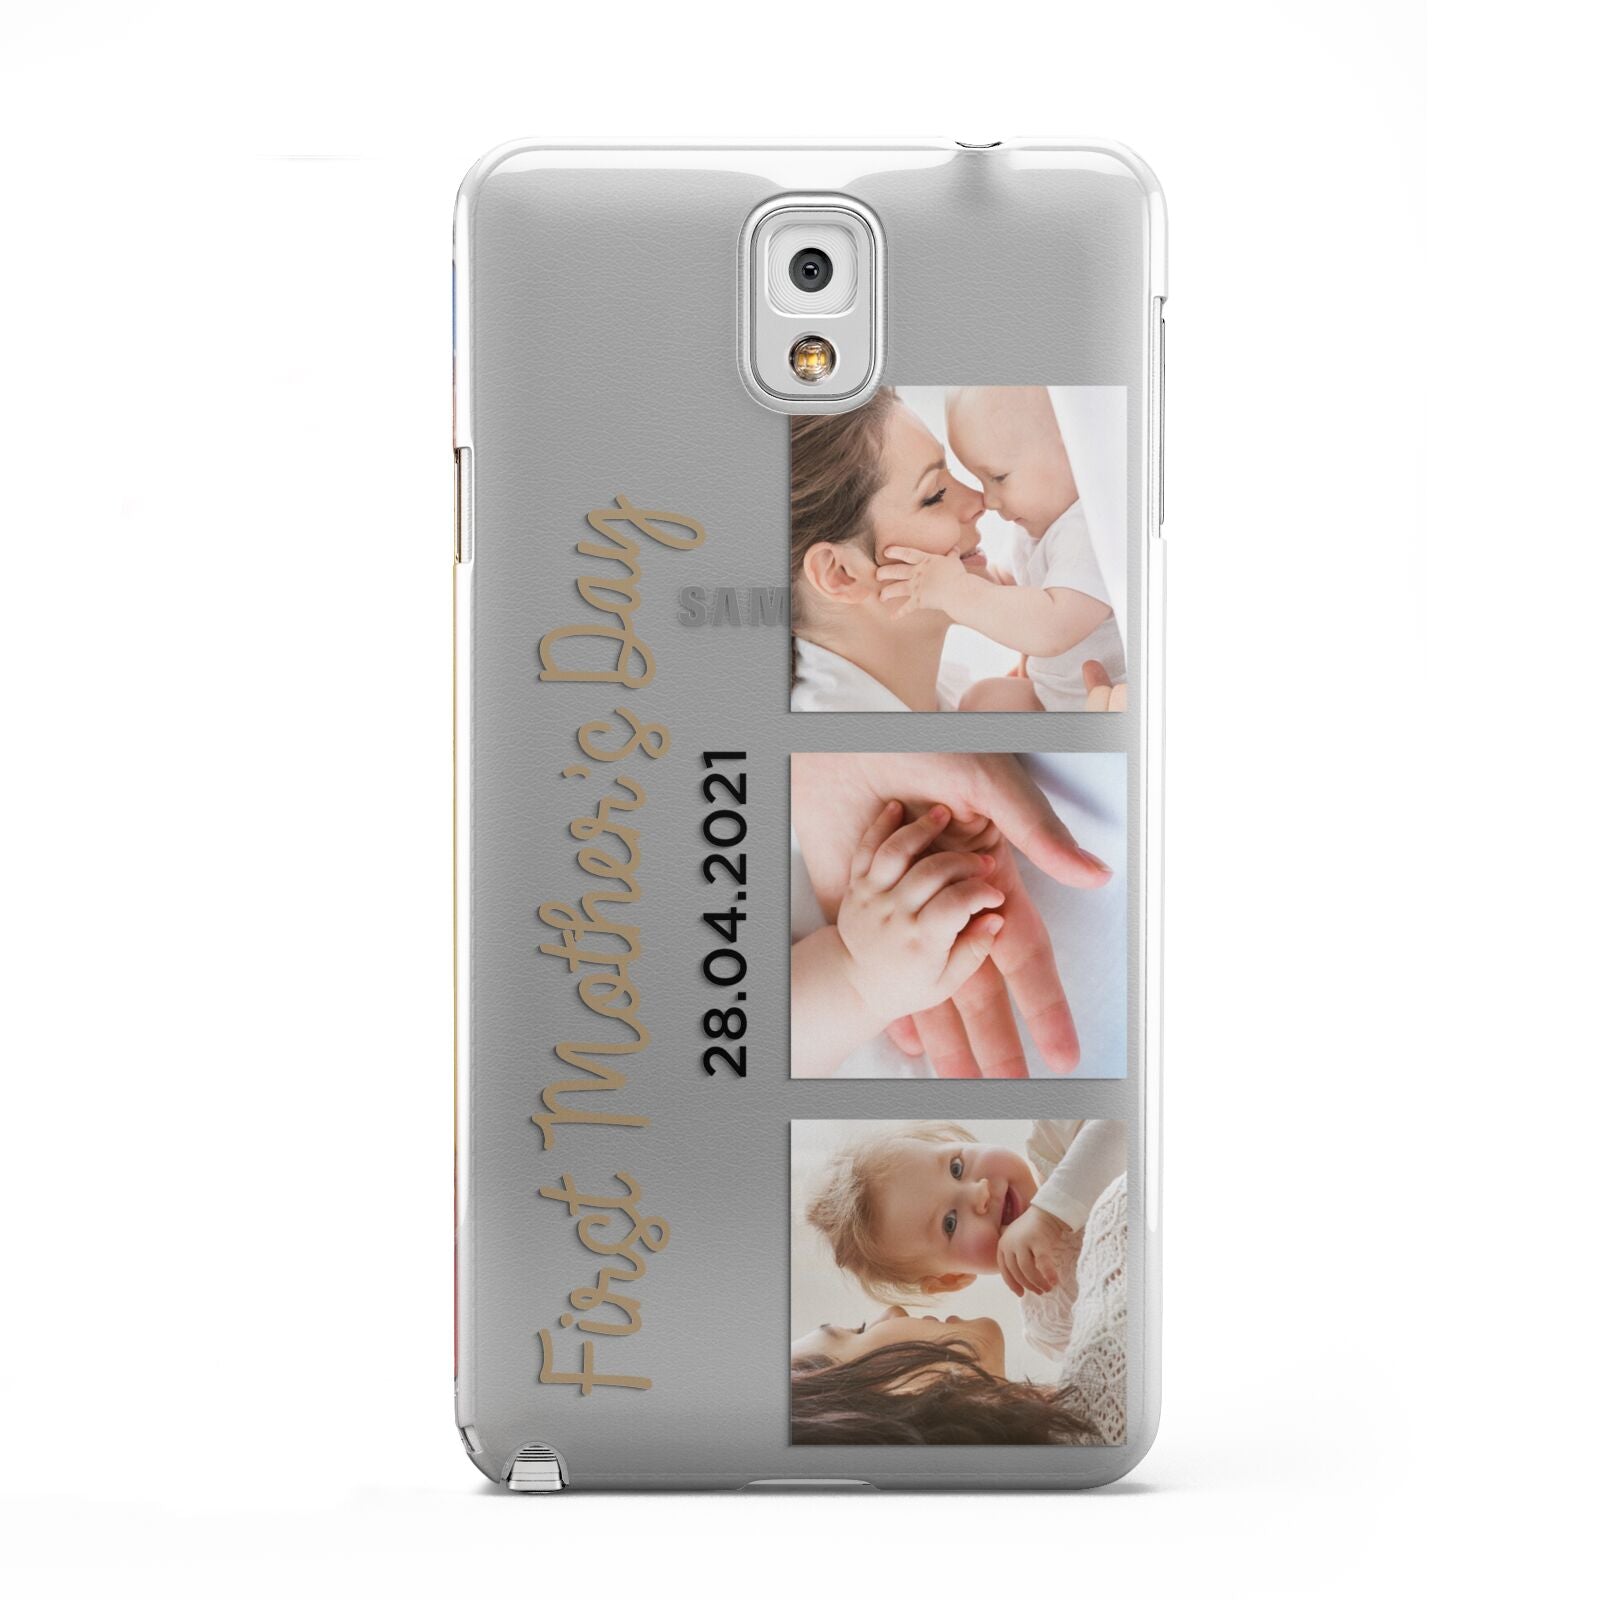 First Mothers Day Photo Samsung Galaxy Note 3 Case